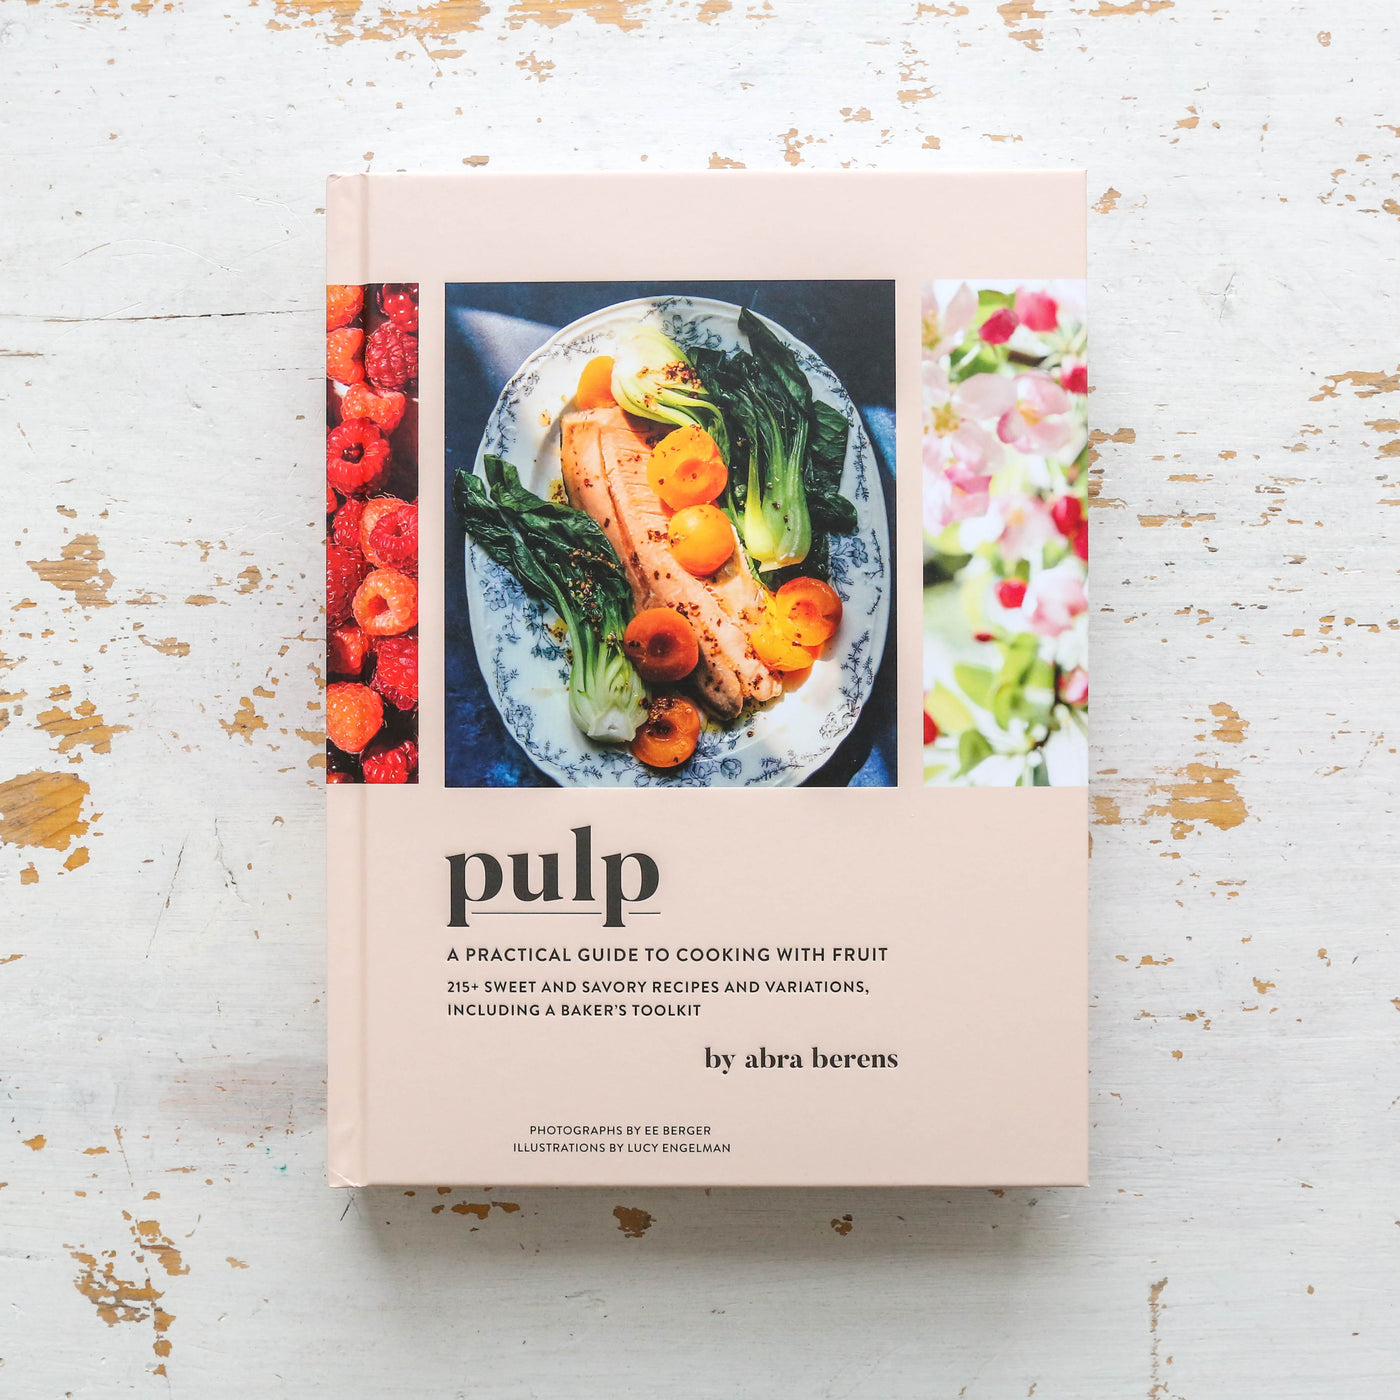 Pulp - A Practical Guide to Cooking with Fruit